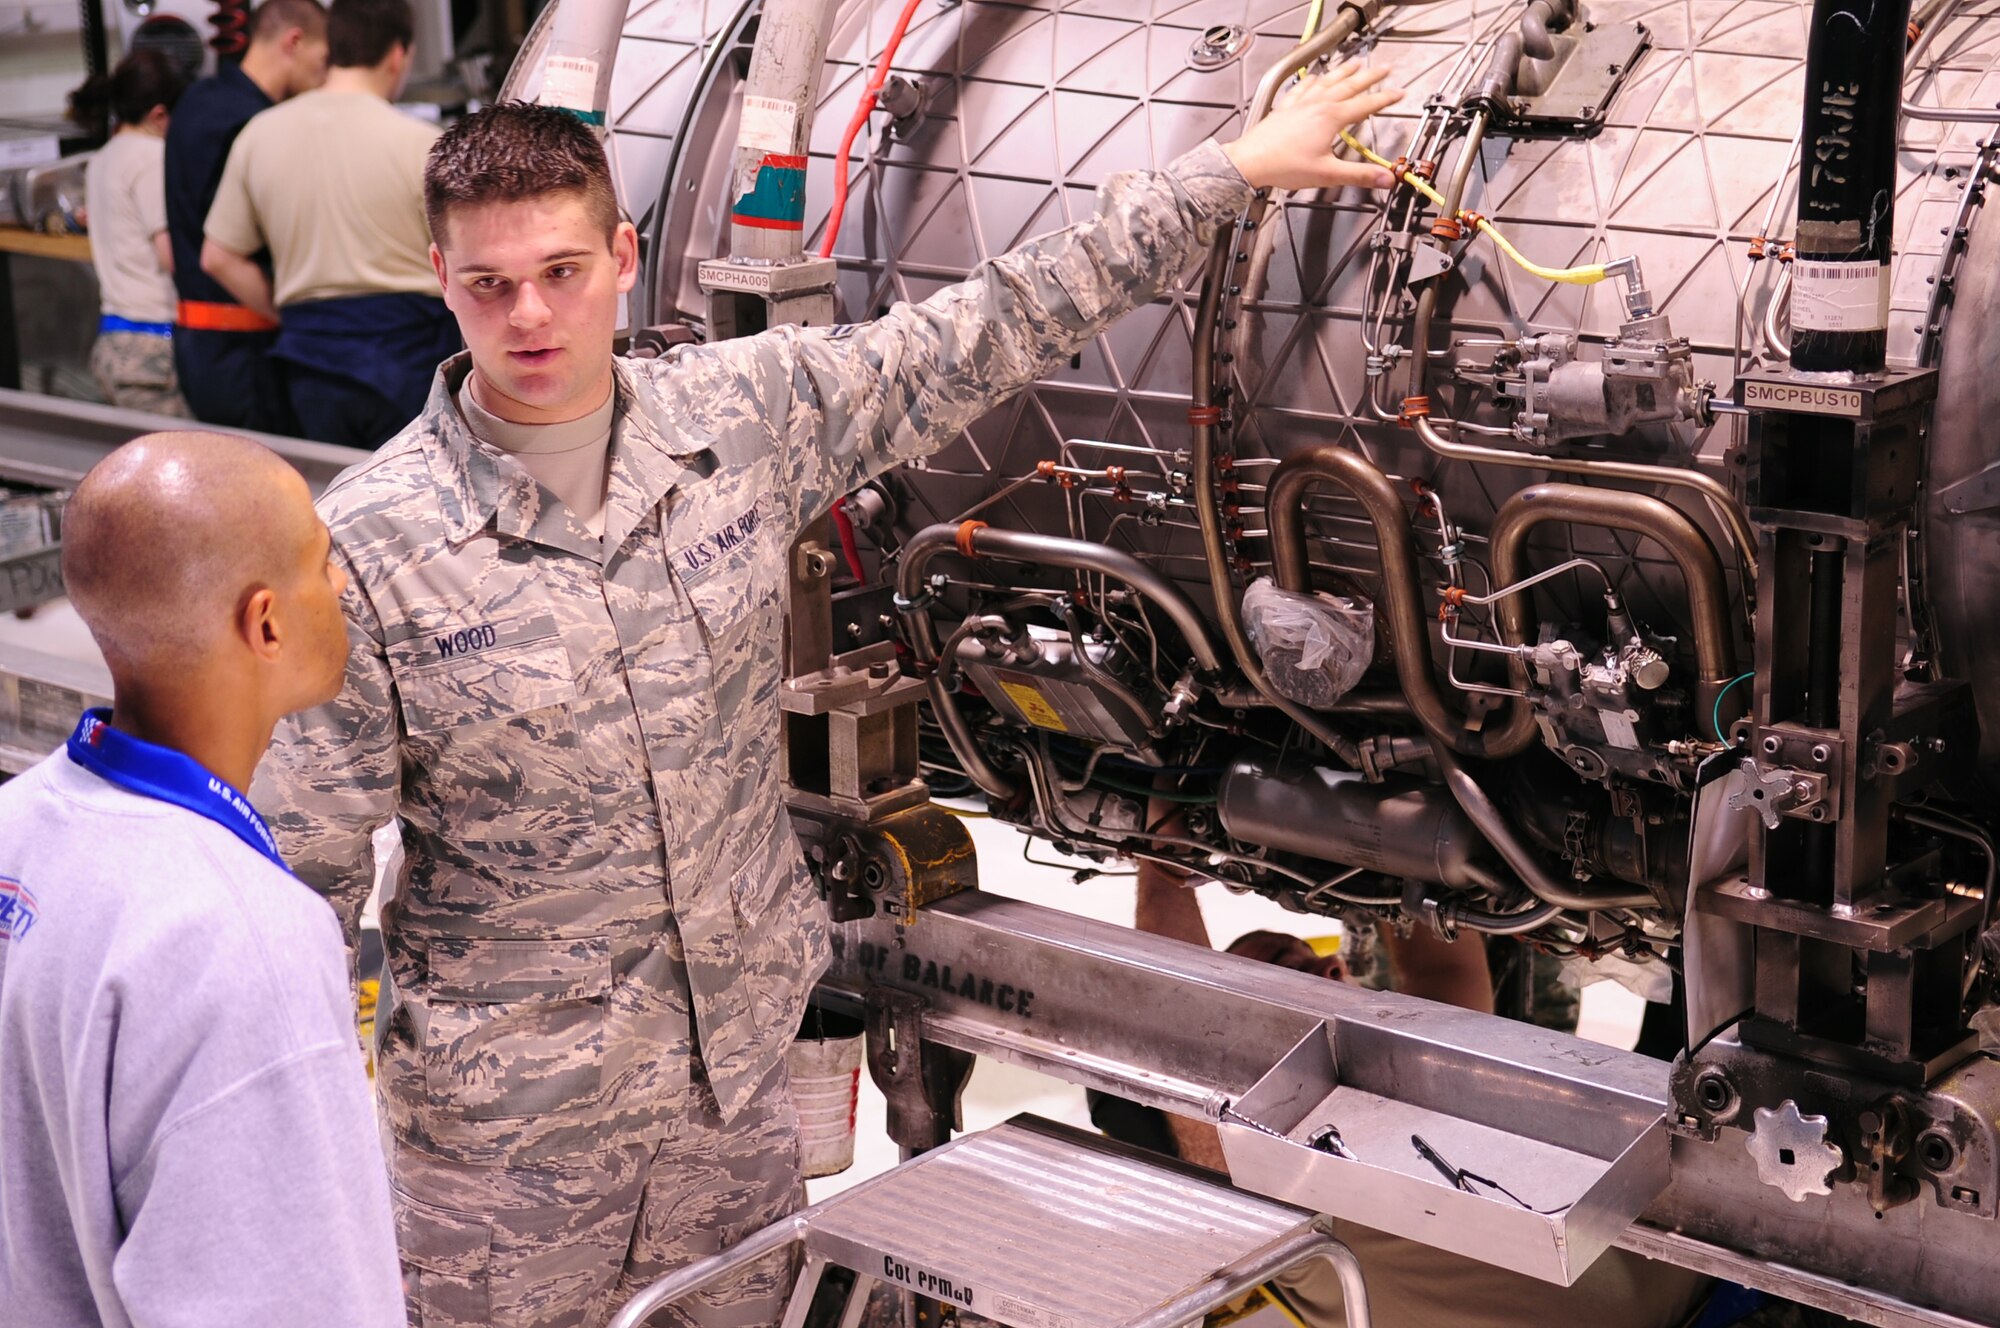 Airman 1st Class Kenneth Wood, 4th Component Maintenance Squadron, explains how to remove an oil cooler for the F-15E Strike Eagle’s jet engine to David Cropps, a mechnic from Richard Petty Motorsports, while being filmed for an Air Force recruiting video at Seymour Johnson Air Force Base, N.C., March 11, 2009. The video will show the parallels between Air Force and NASCAR jobs. (U.S. Air Force photo by Airman 1st Class Rae Perry)